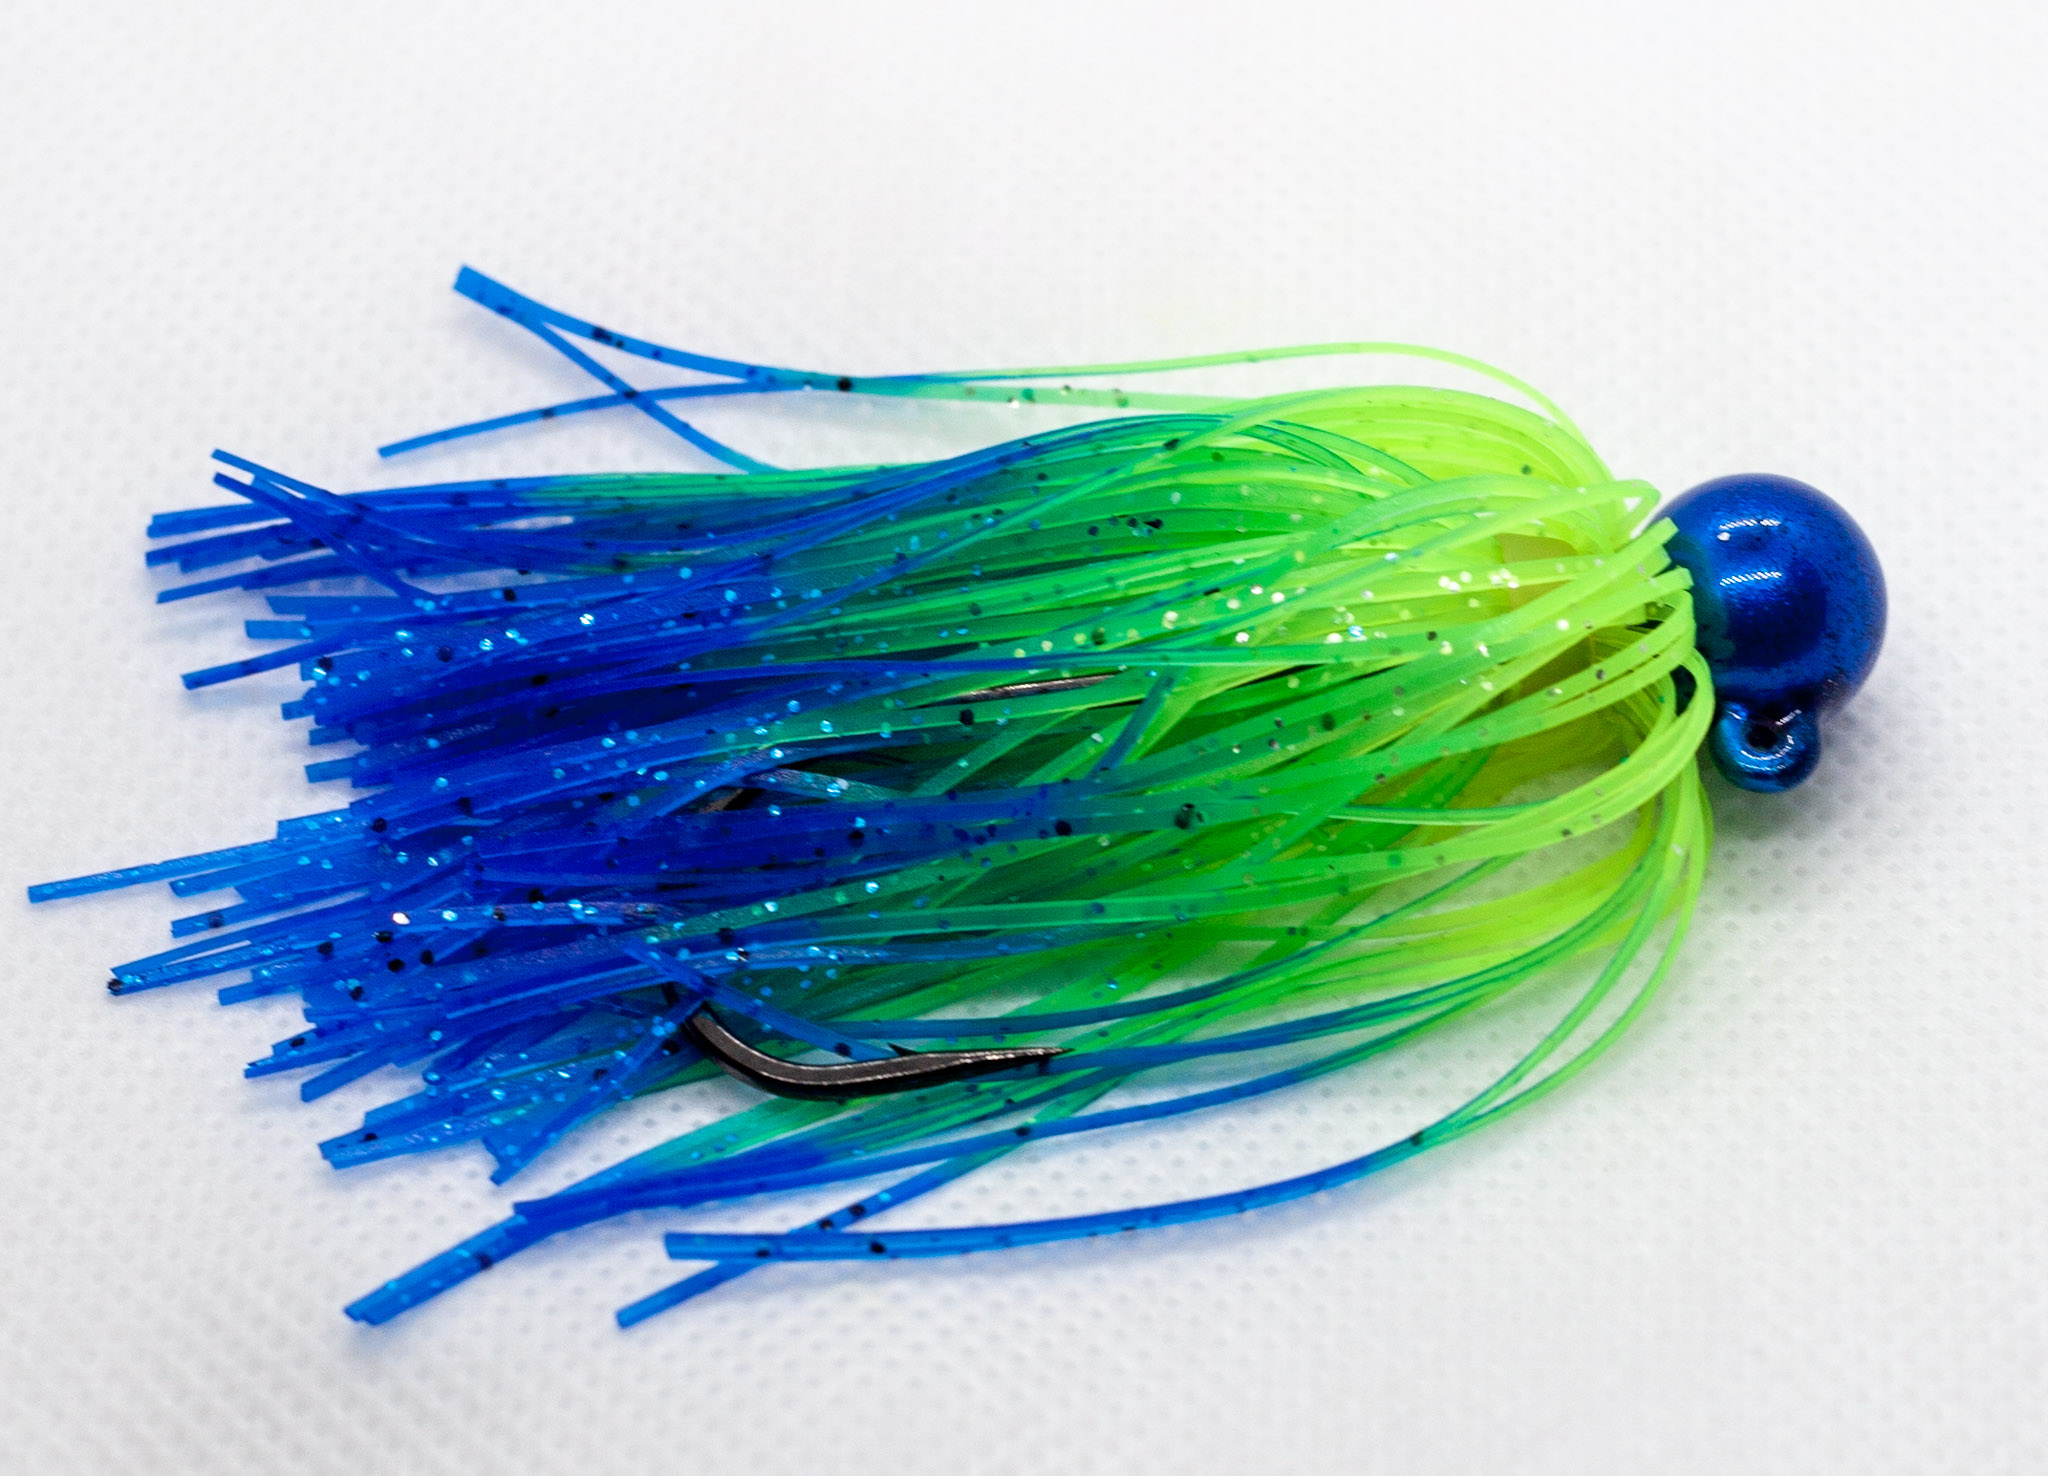 https://mcproductimages.s3.us-west-2.amazonaws.com/bnr-tackle/bnr-tackle-salmon-twitching-jigs/BNR-TWJHK3-8.jpg